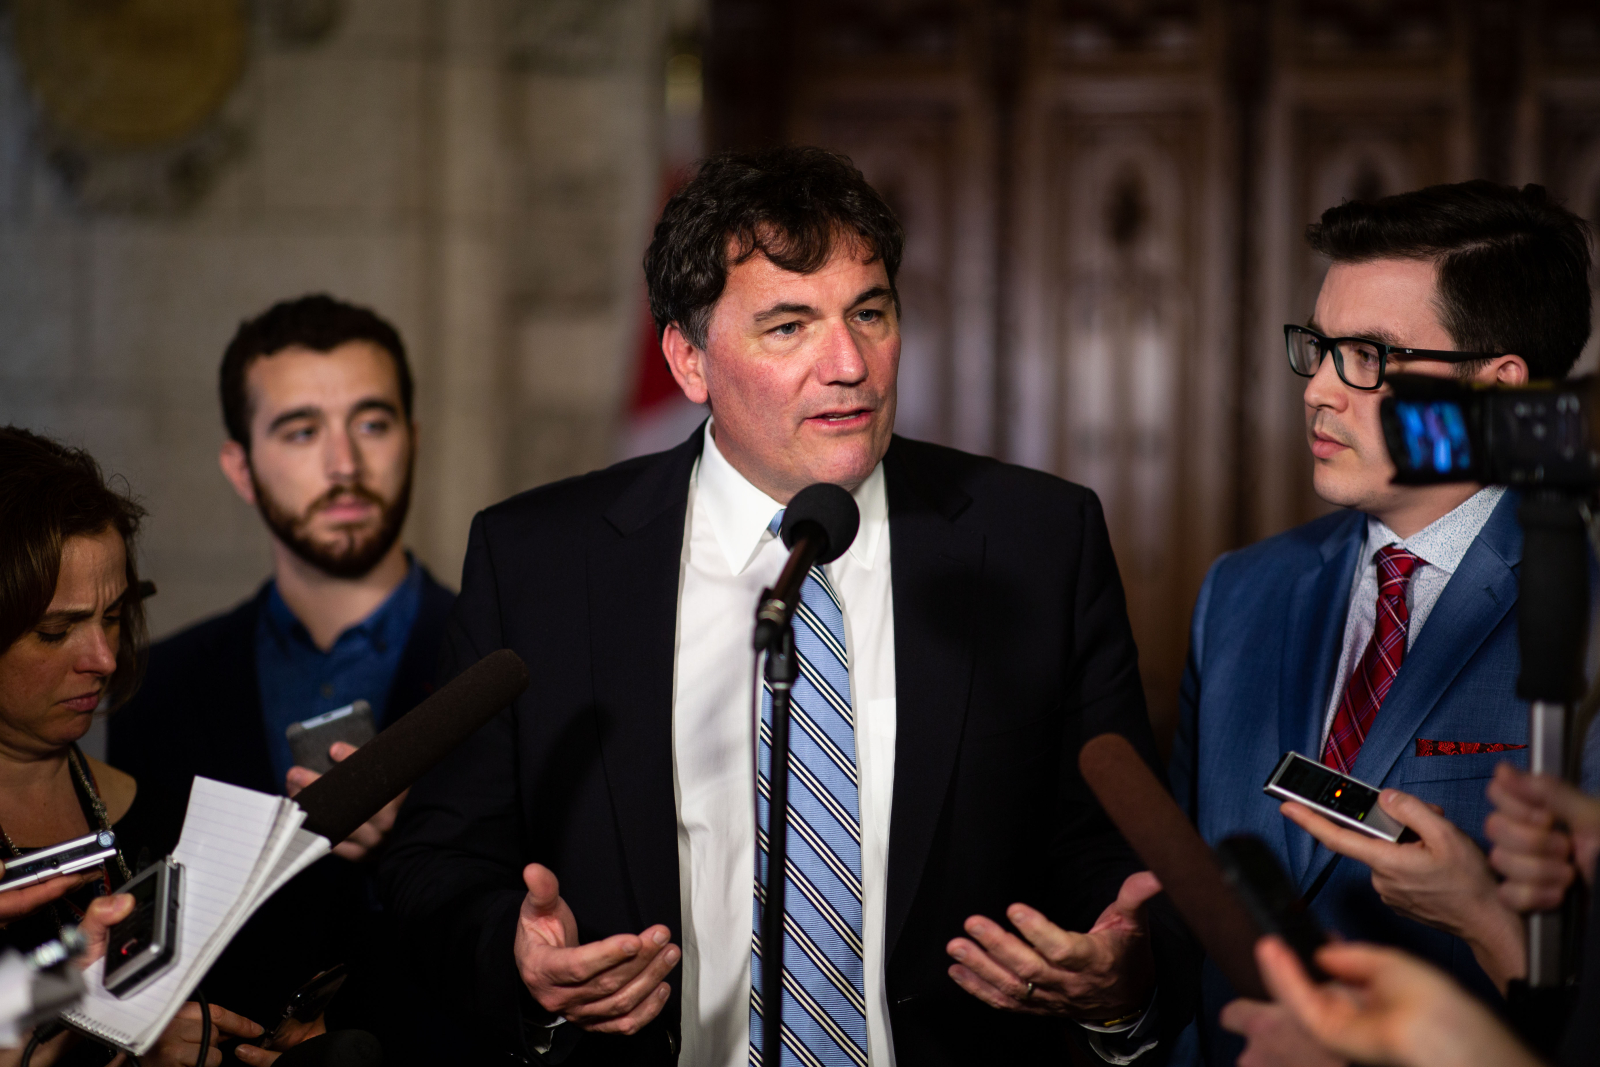 Dominic LeBlanc, the minister of fisheries, oceans and the Canadian Coast Guard, fields reporters' questions about salmon farming in Ottawa on April 24, 2018. Photo by Alex Tétreault